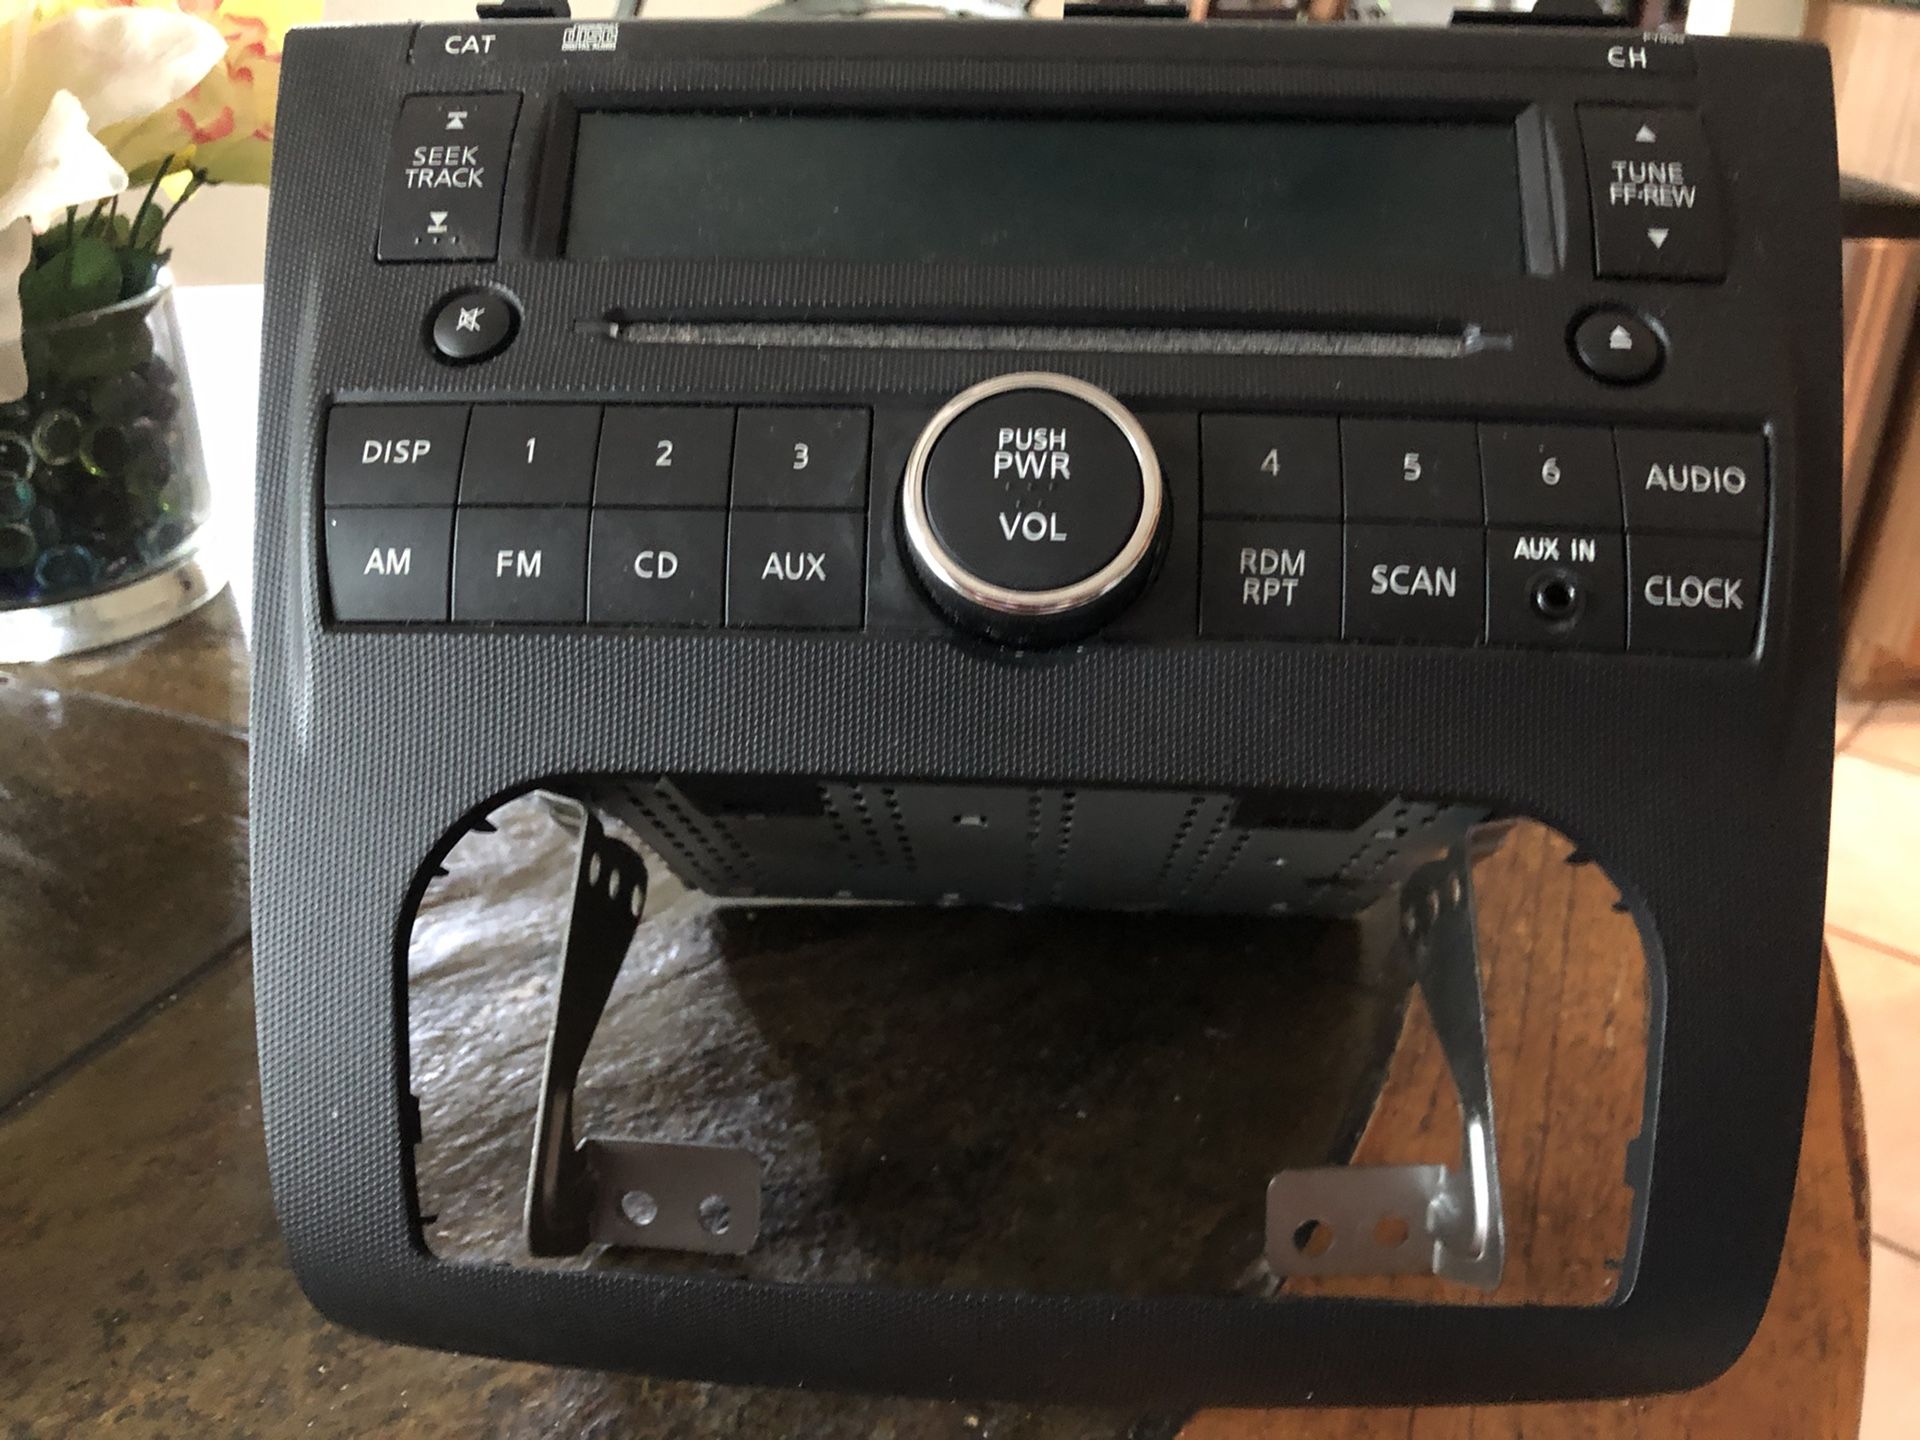 Nissan Altima factory stock Stereo/CD player.